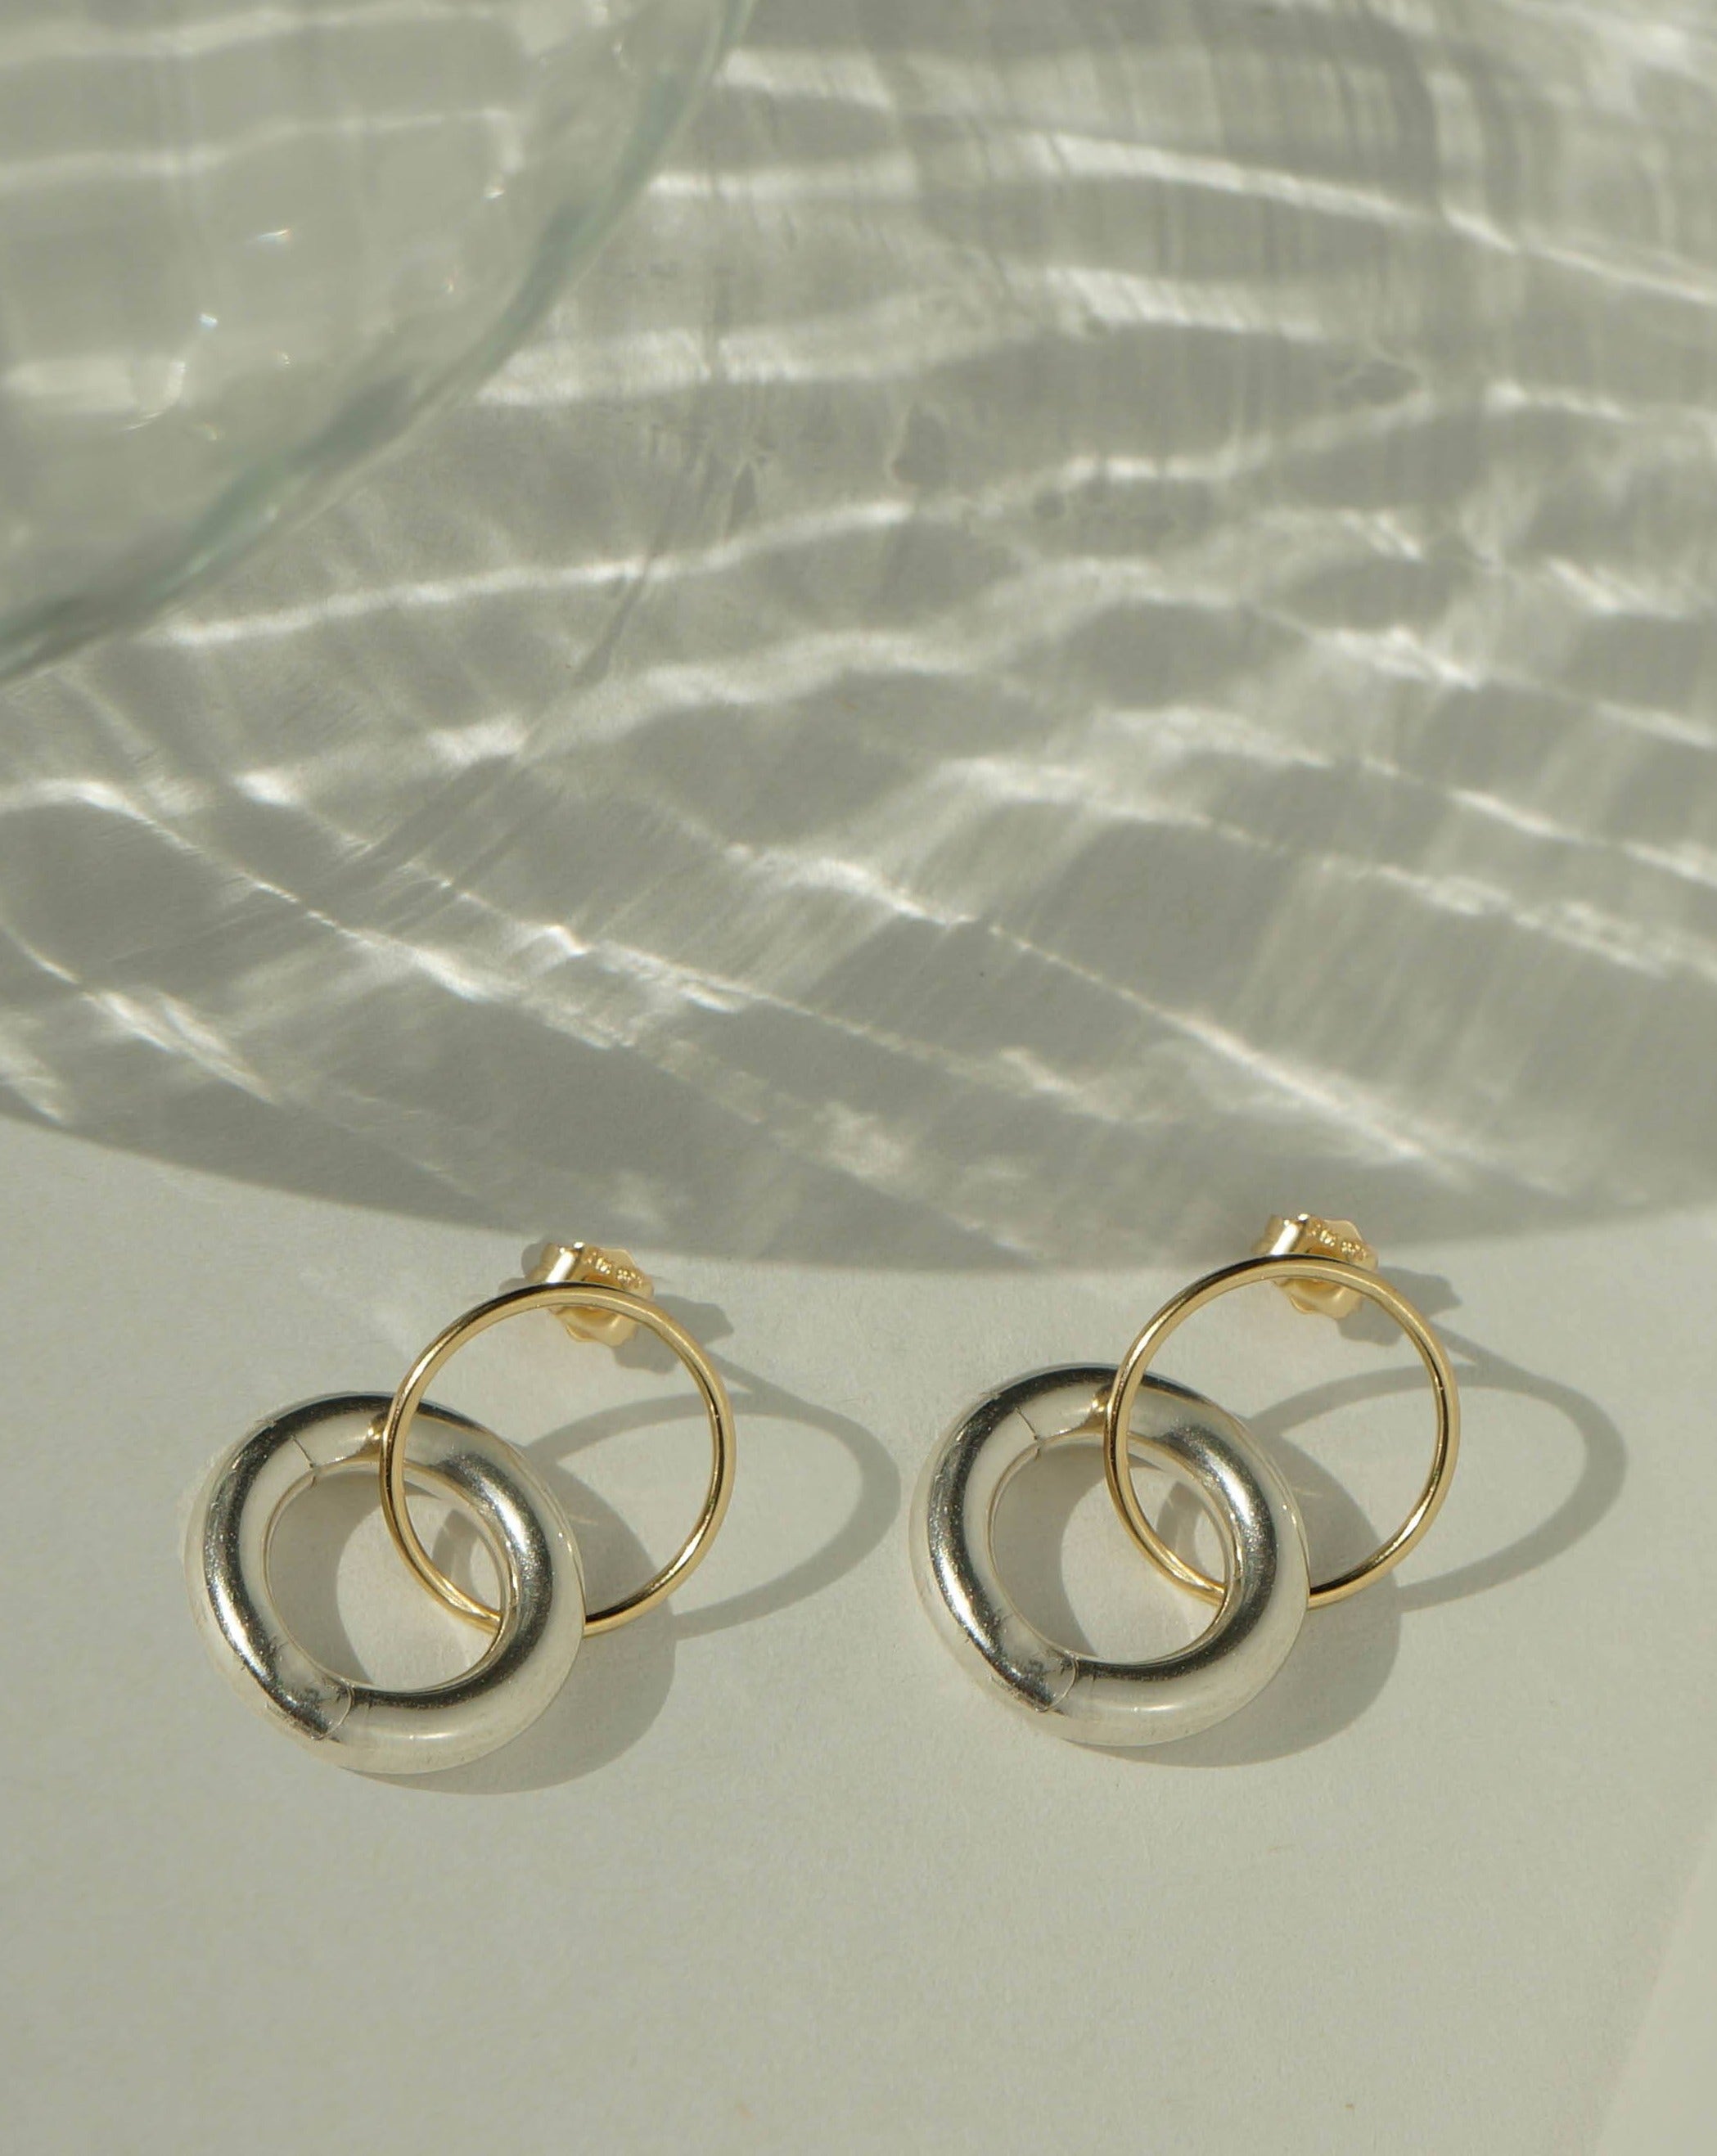 Charlotte Earrings by KOZAKH. Stud earrings in 14K Gold Filled, featuring a dangling and removable silver huggies.